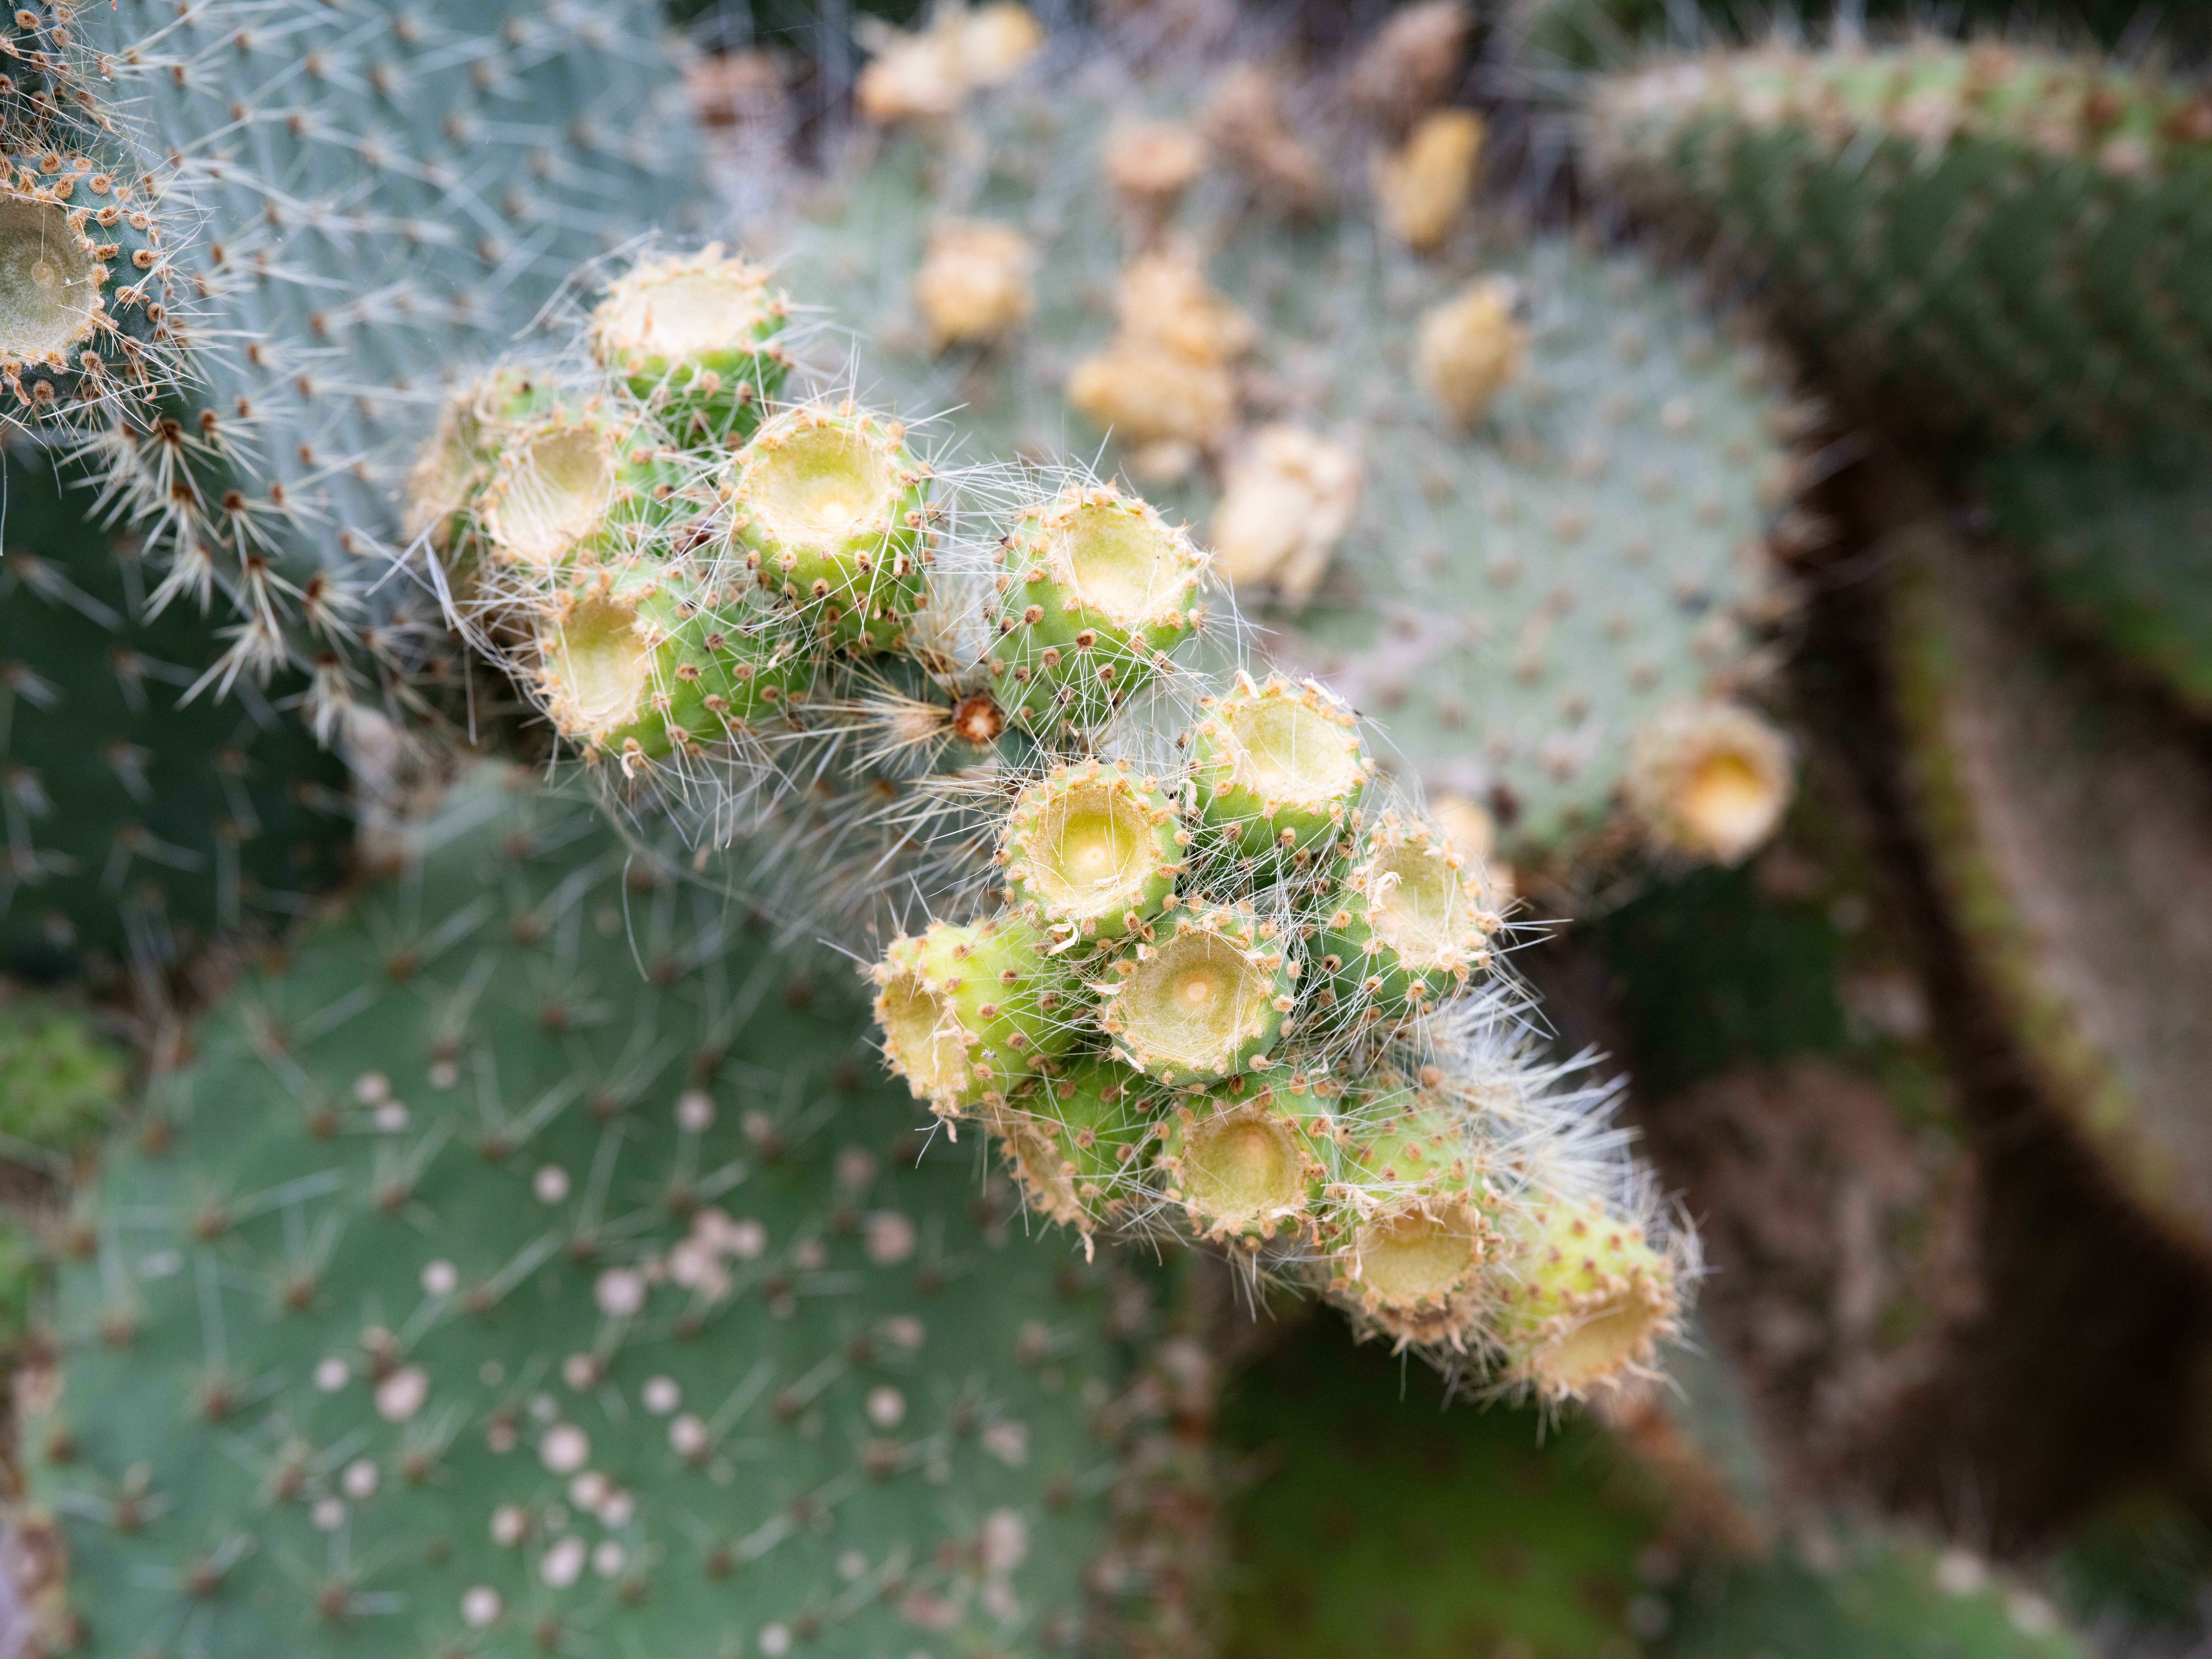 A photo of cactus flowers.